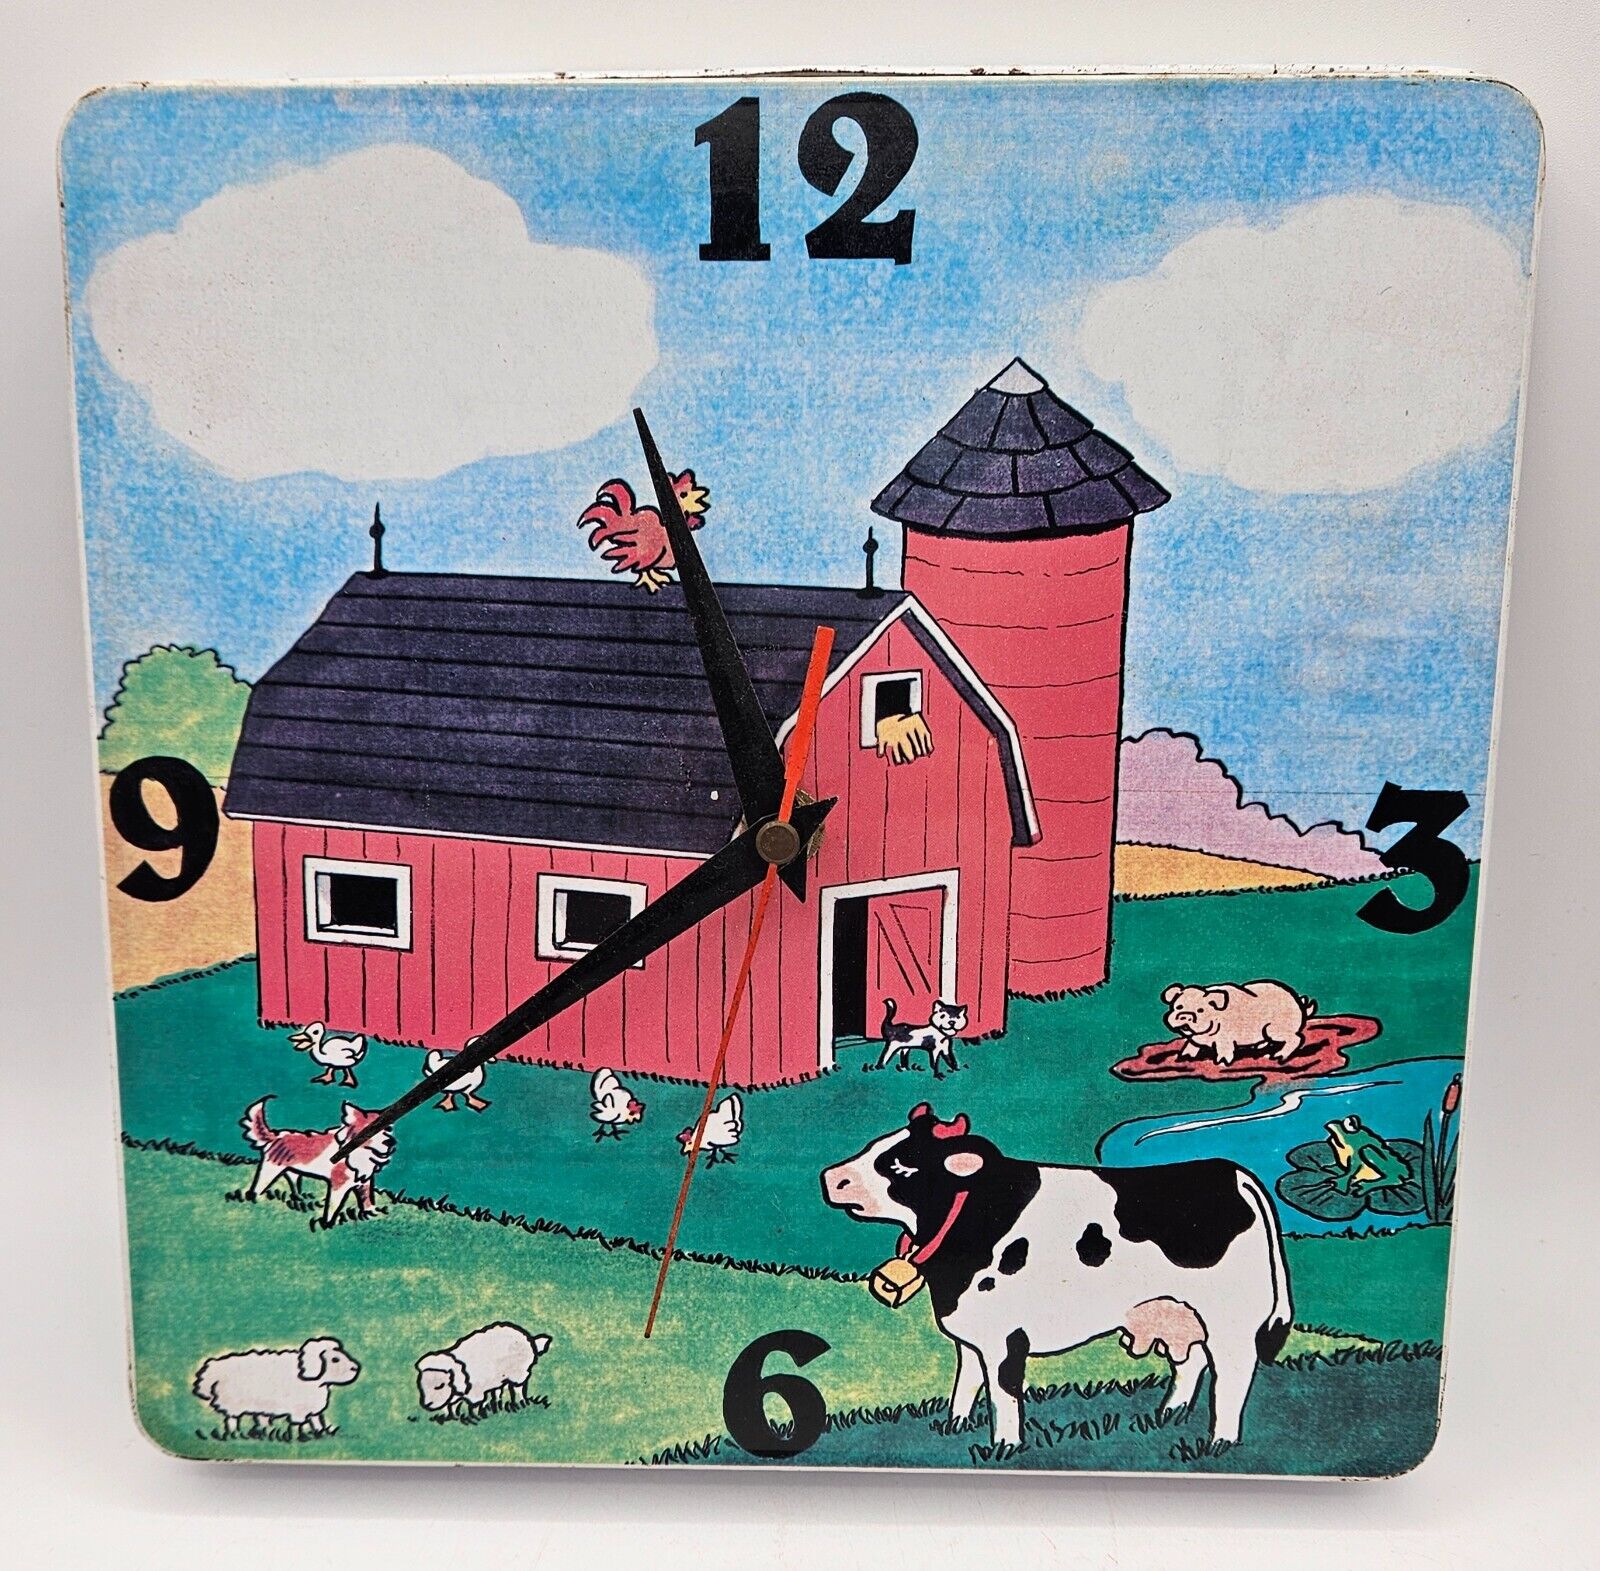 Vintage 1995 Square Metal Farm Animal Wall Clock NON-WORKING FOR PARTS/REPAIR